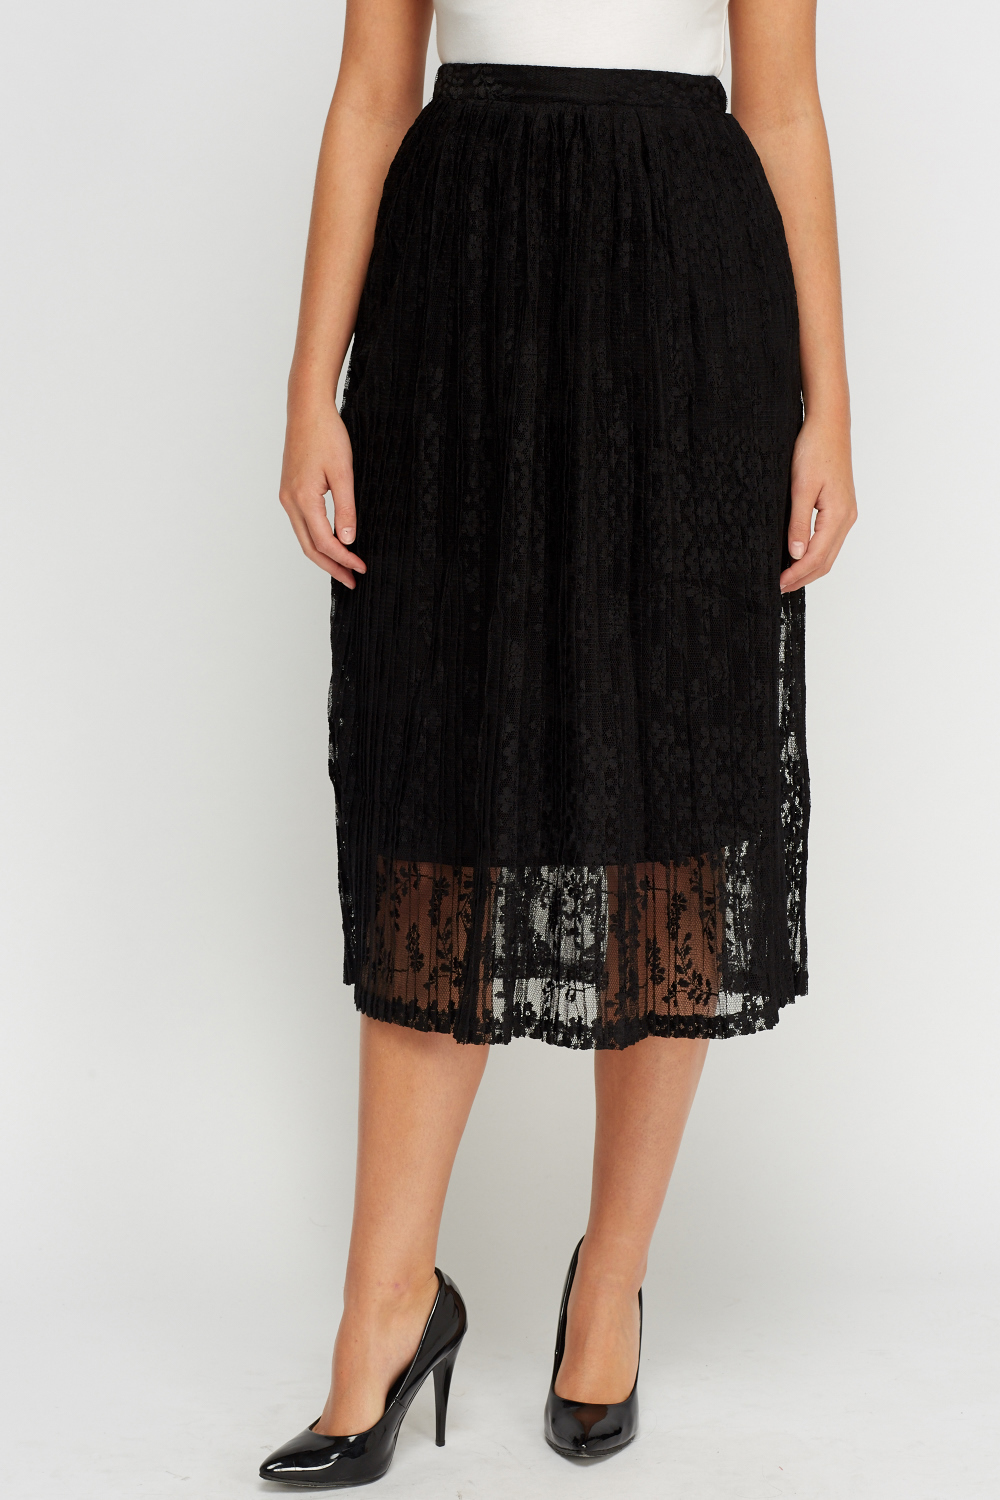 Lace Overlay Pleated Skirt - Just $7